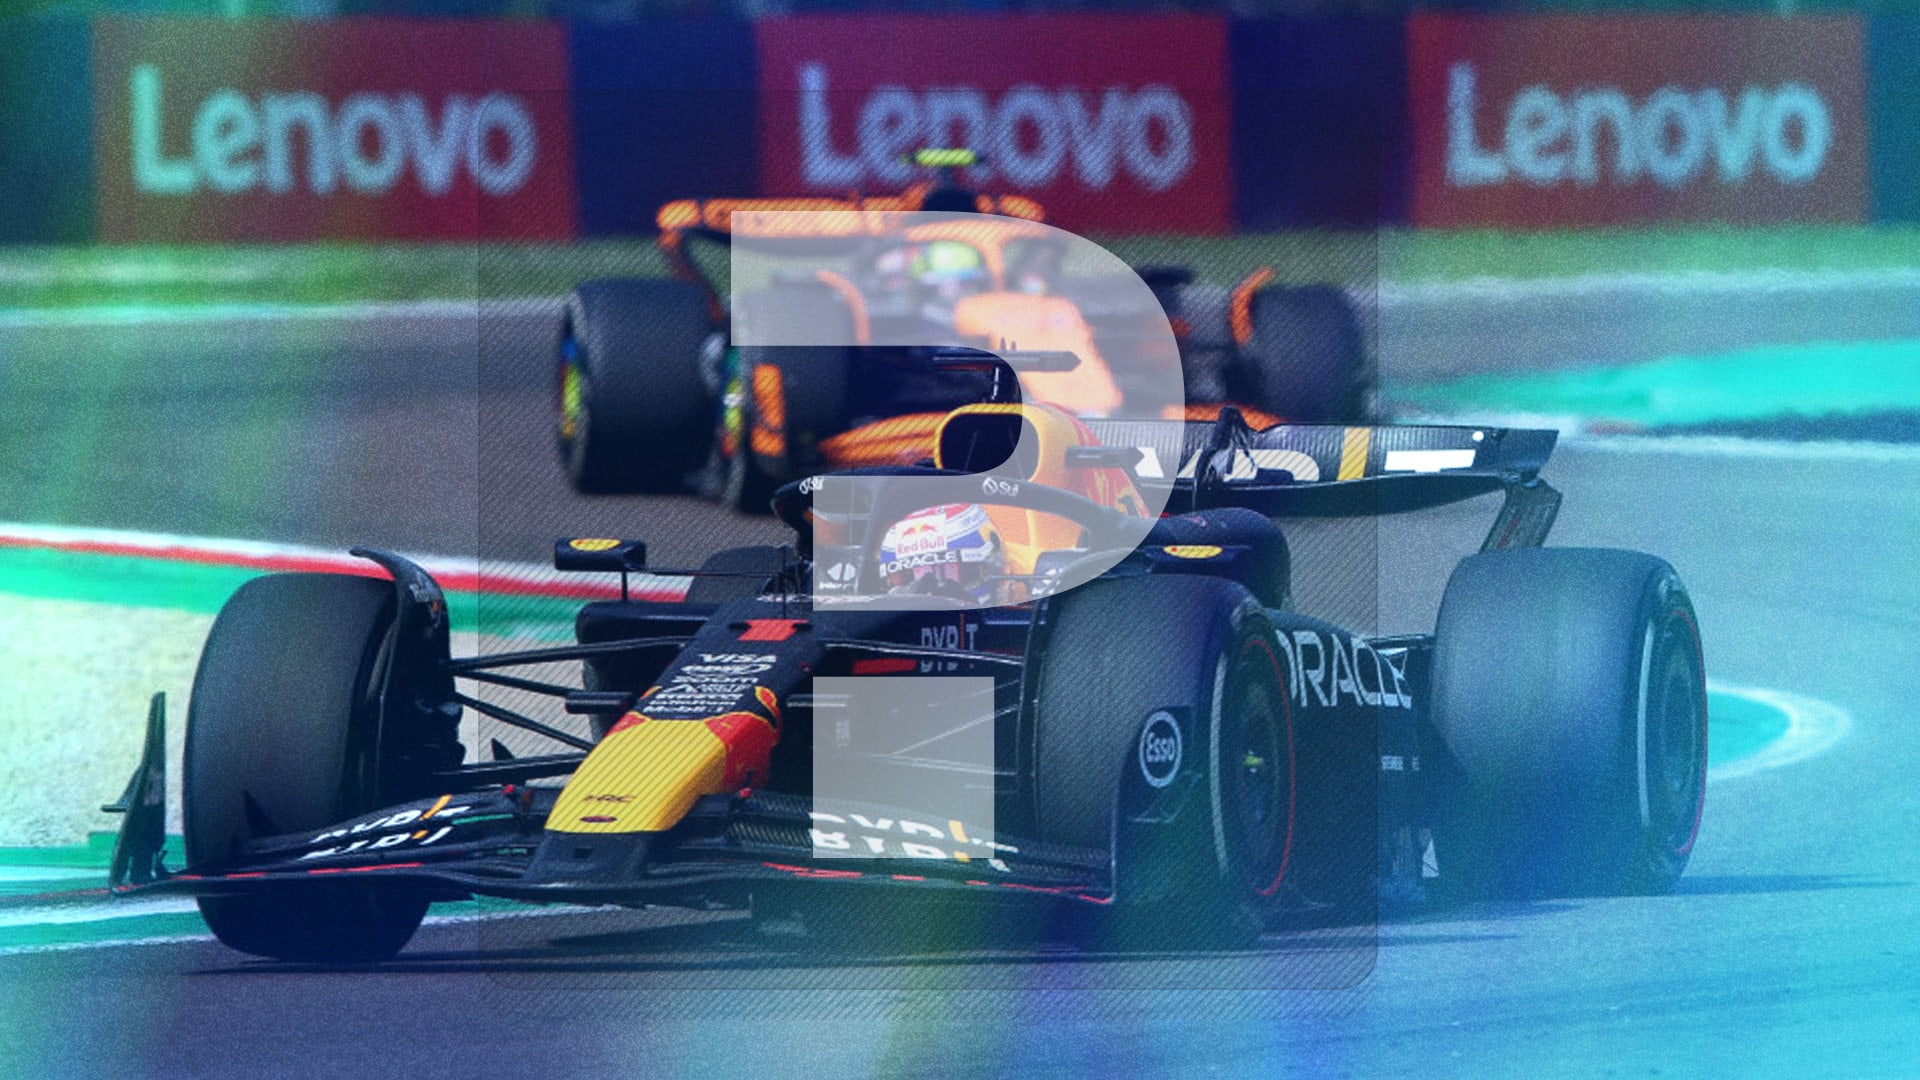 THIS WEEK IN F1: 10 tough quiz questions on the Emilia Romagna GP and the latest F1 news